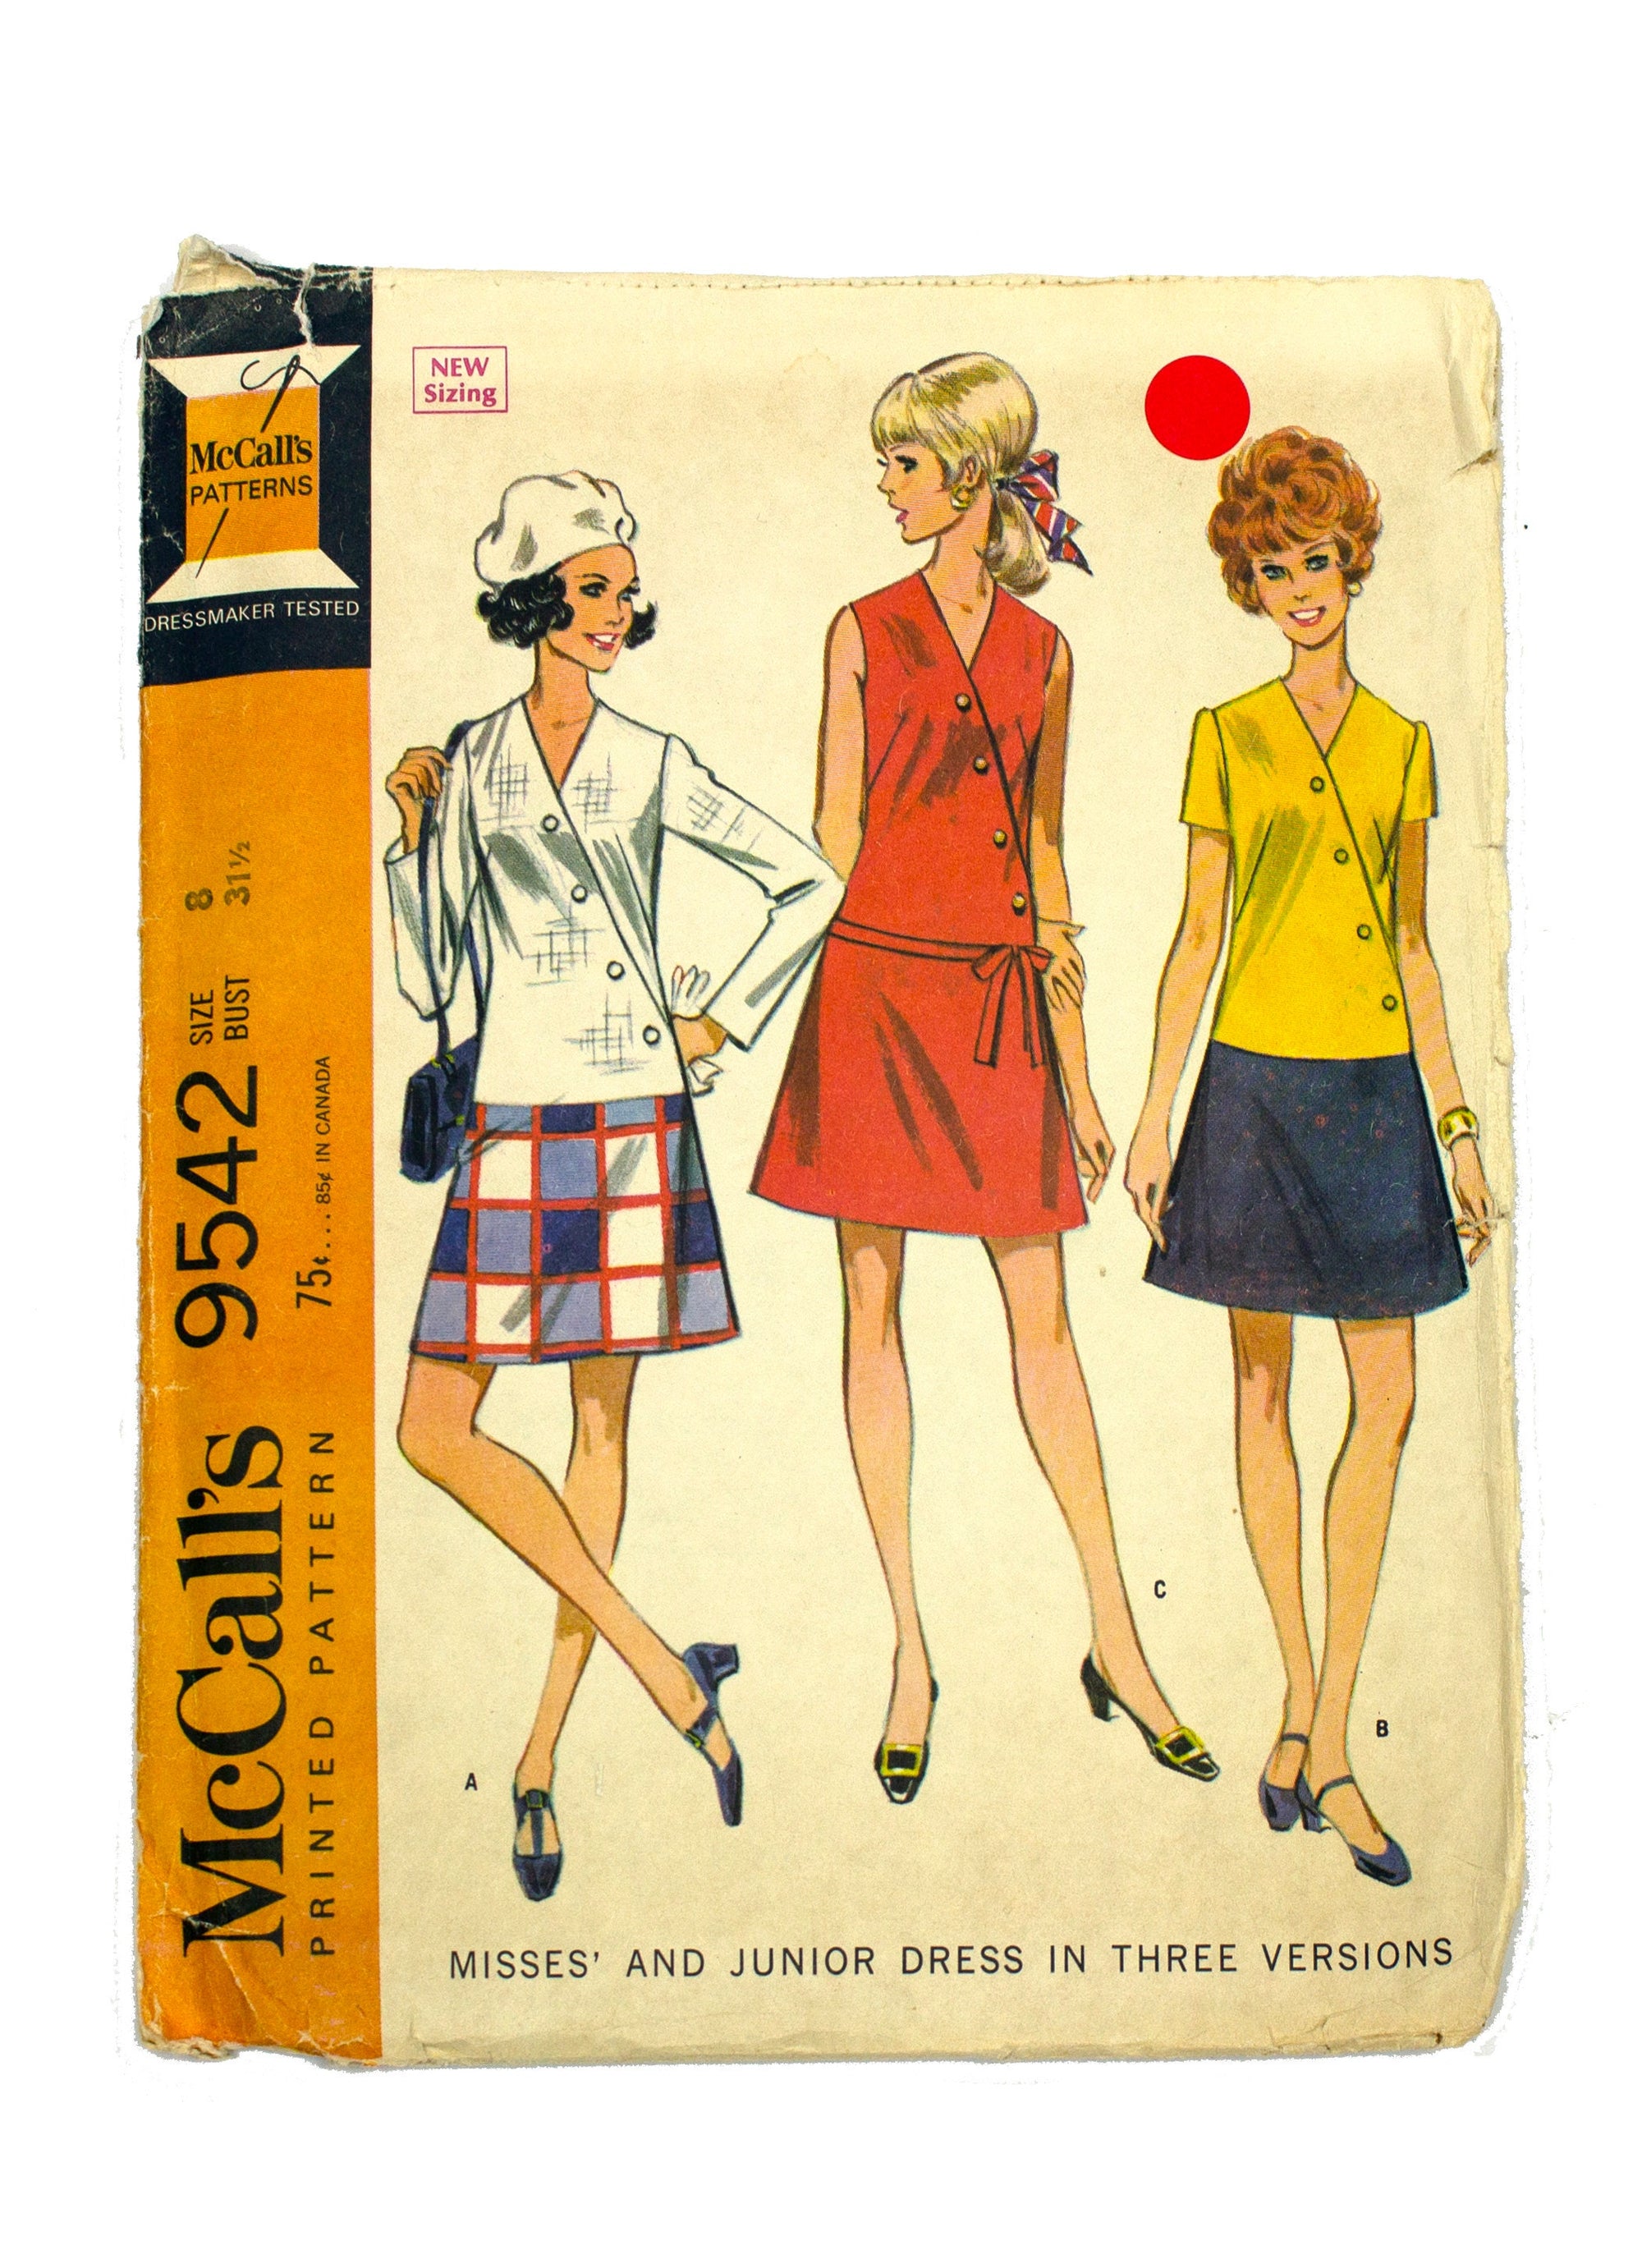 McCall's 9542 Women's Long Torso Dress in Three Versions - Size 8 Bust 31 1/2